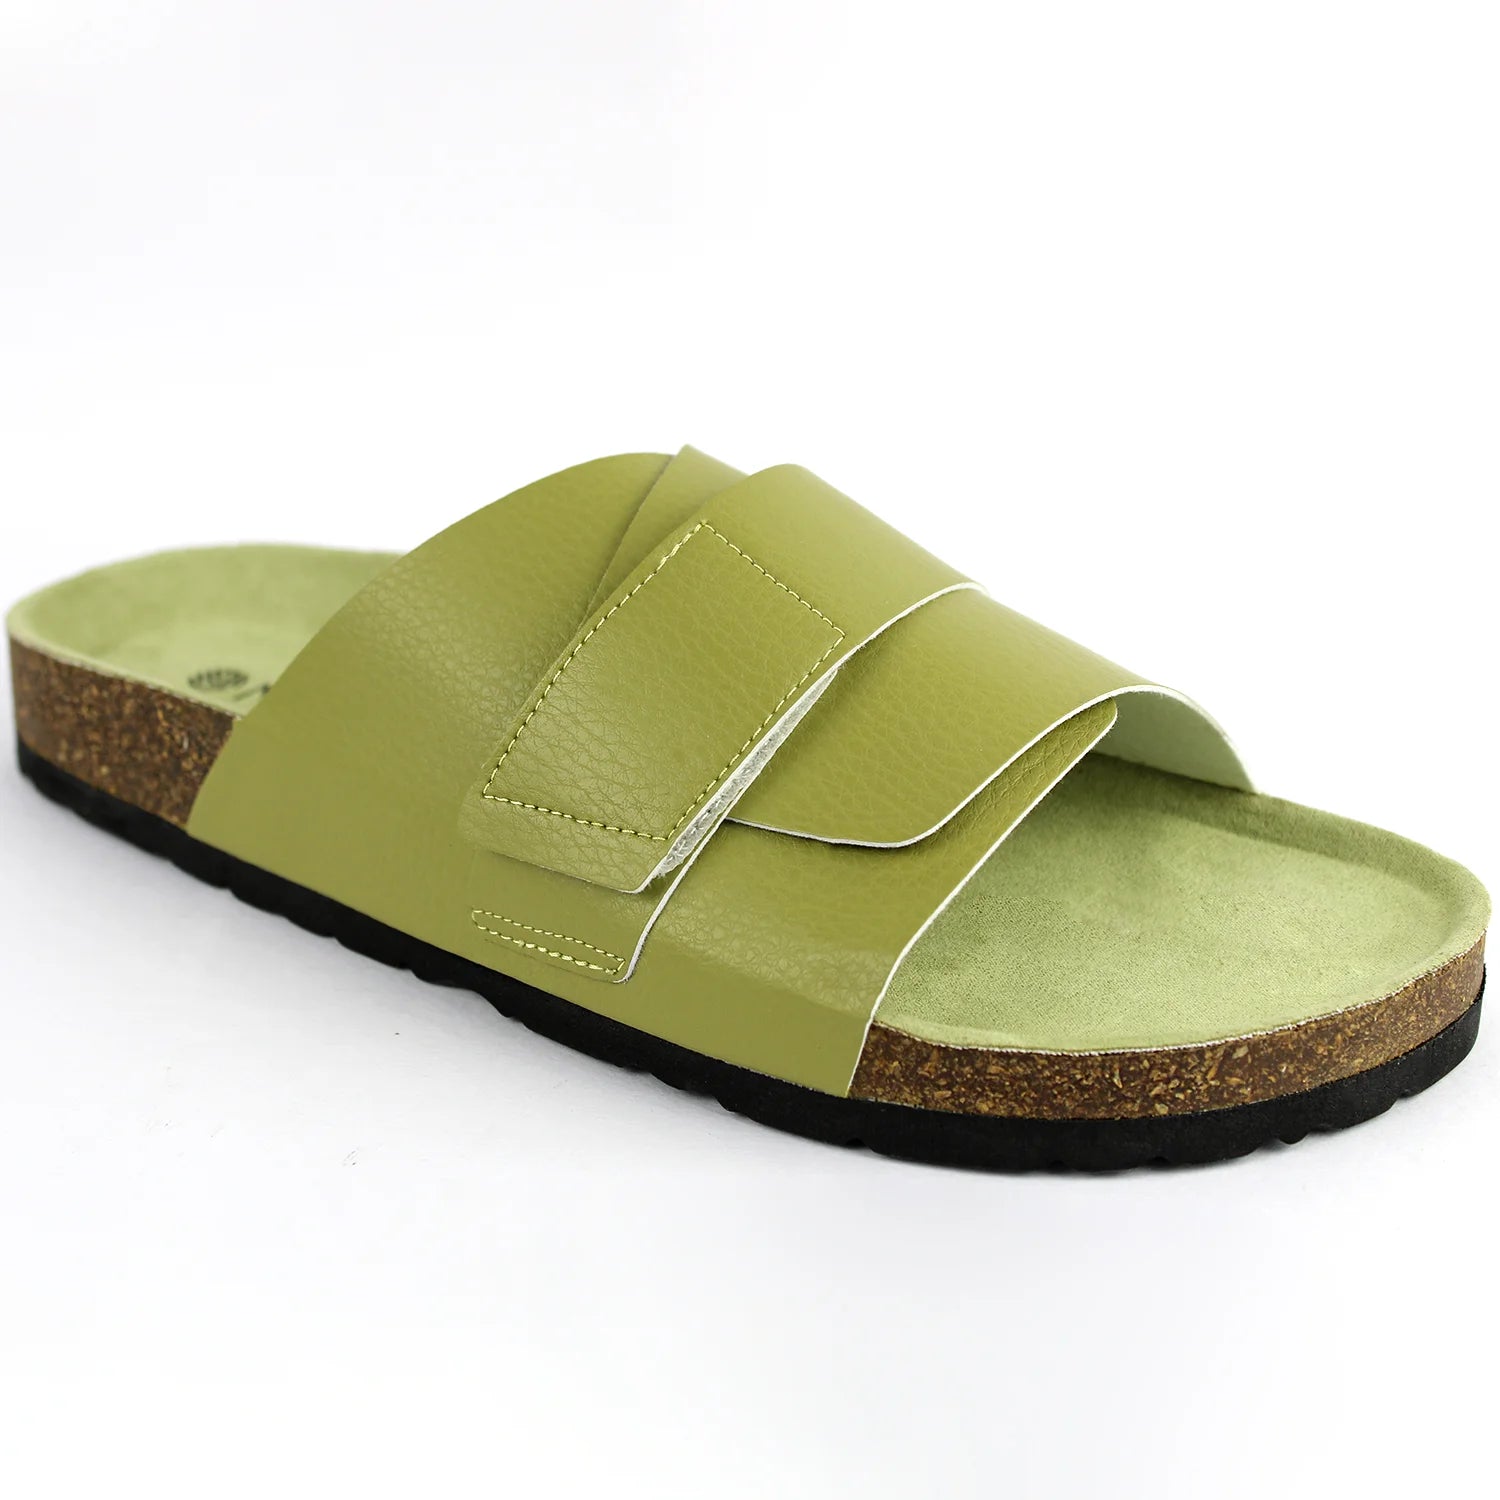 Breely sandals 14843